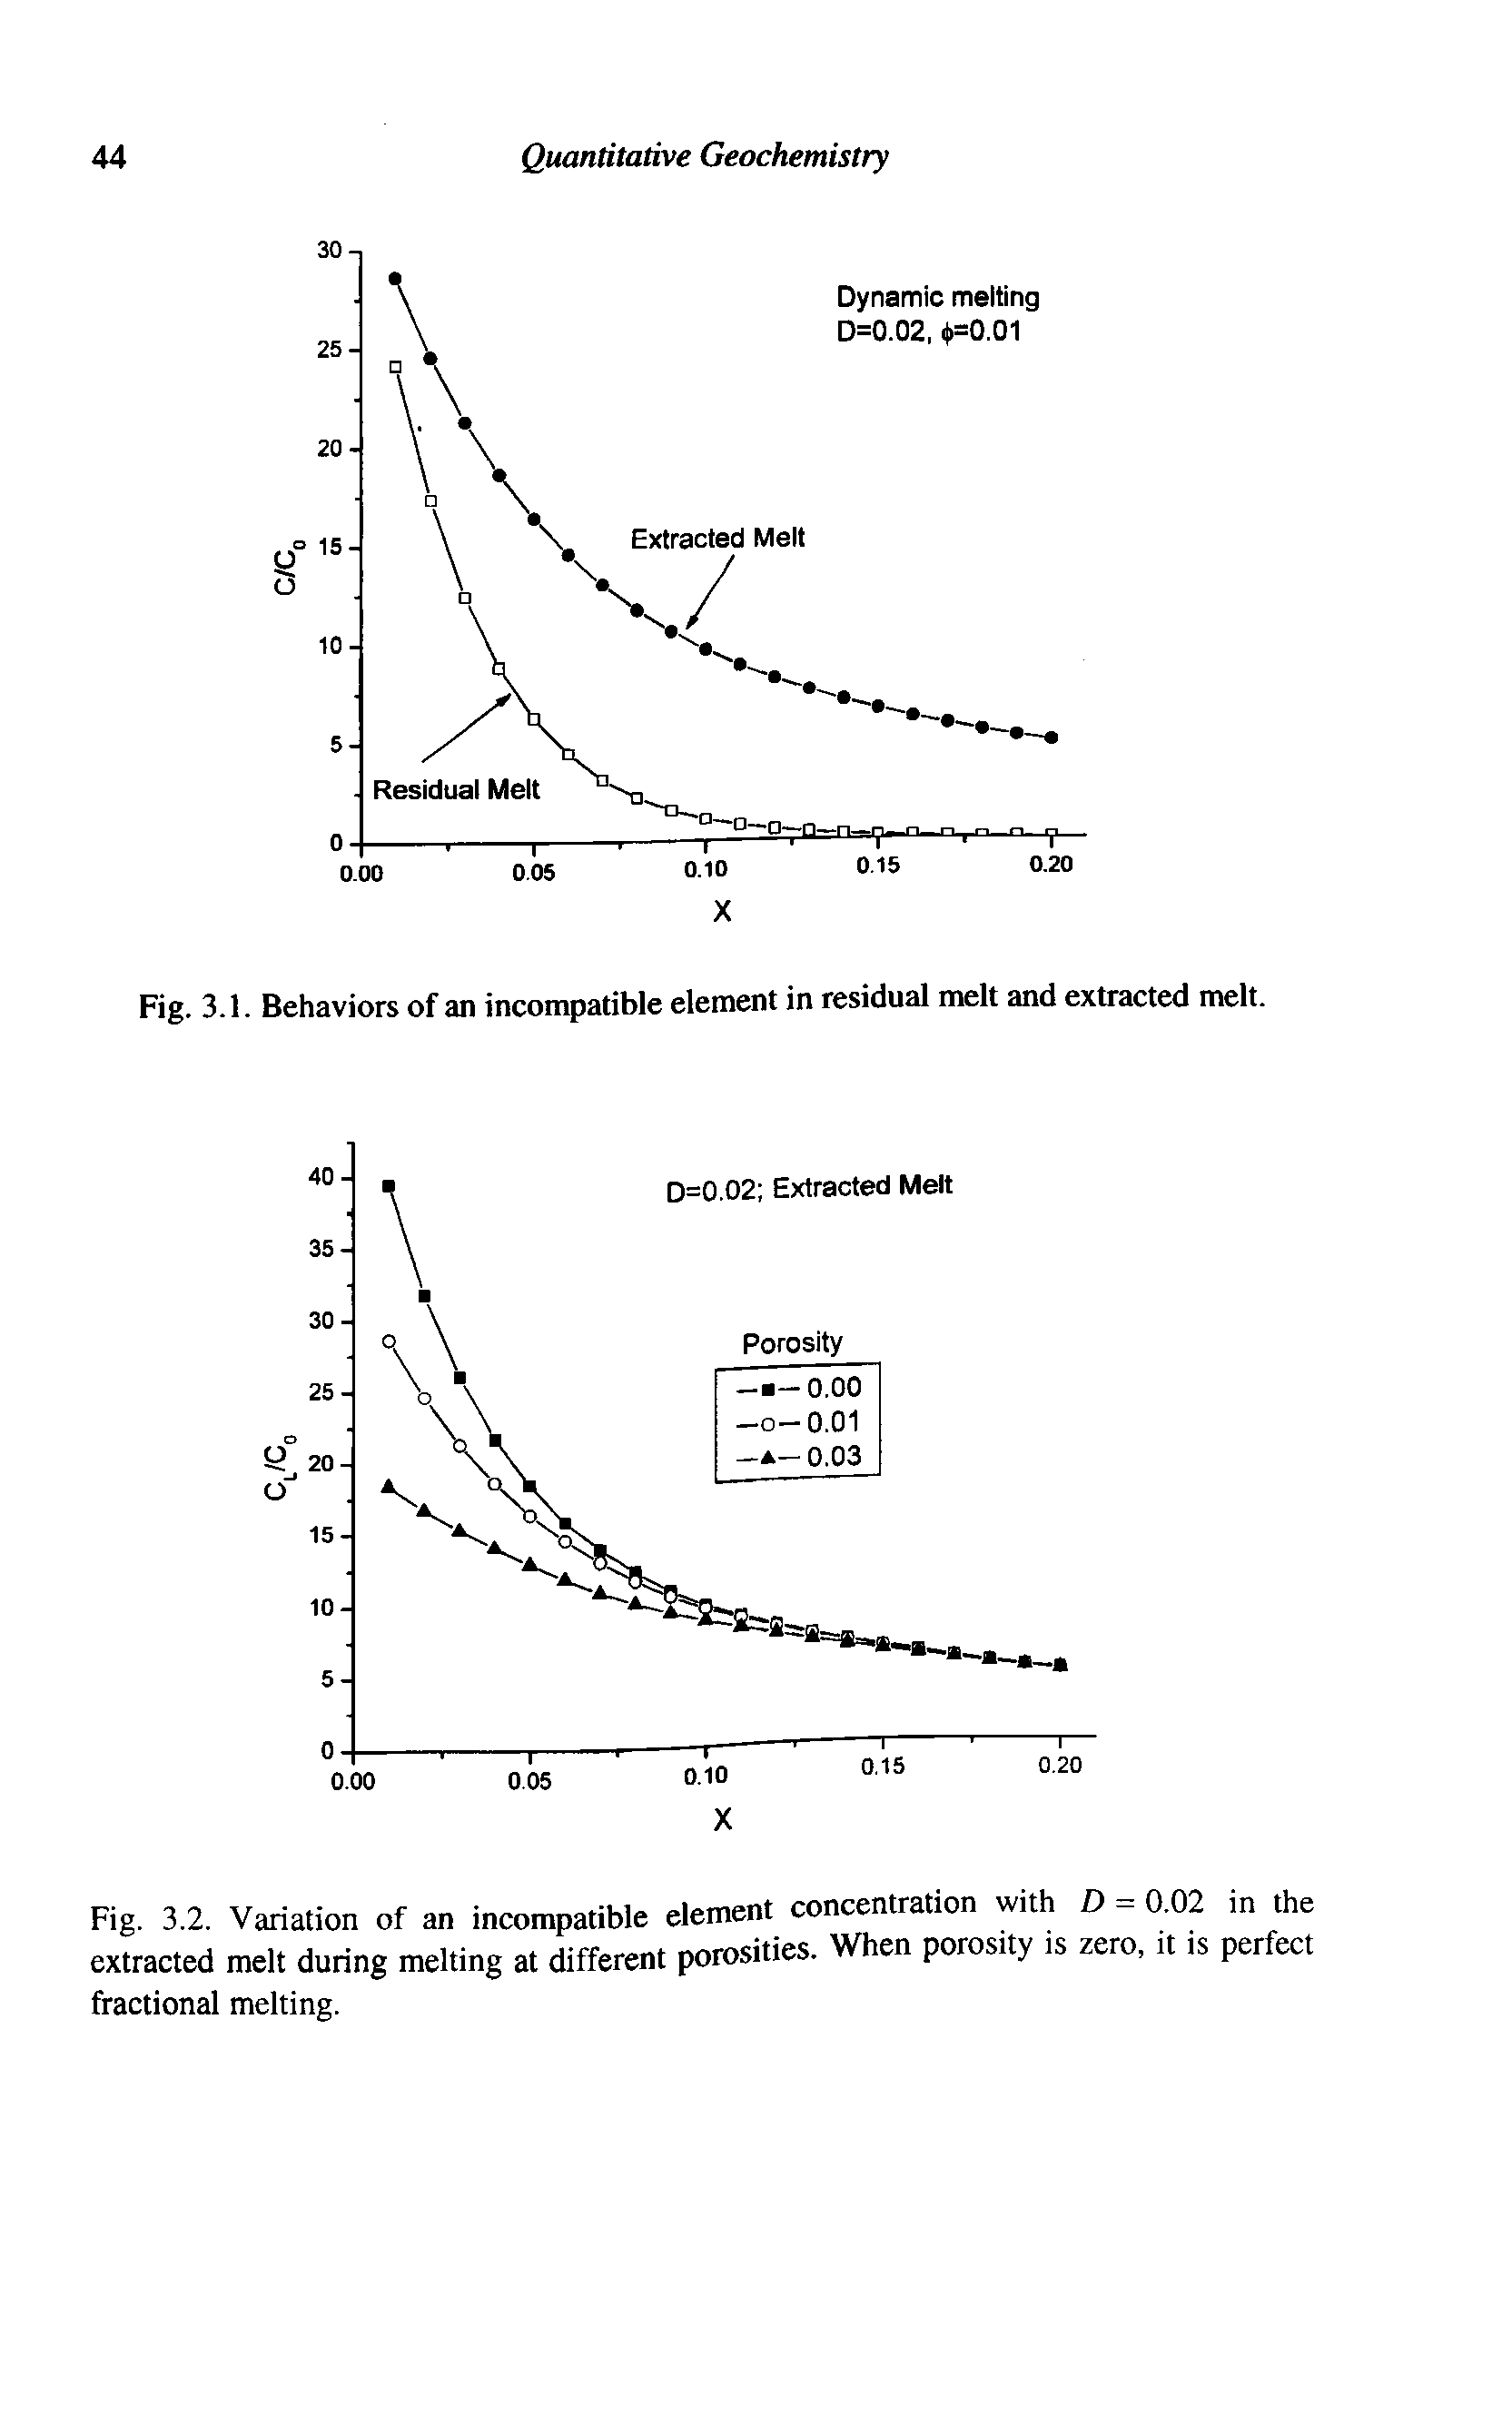 Fig. 3.2. Variation of an incompatible element concentration with D = 0.02 in the extracted melt during melting at different porosities. When porosity is zero, it is perfect fractional melting.